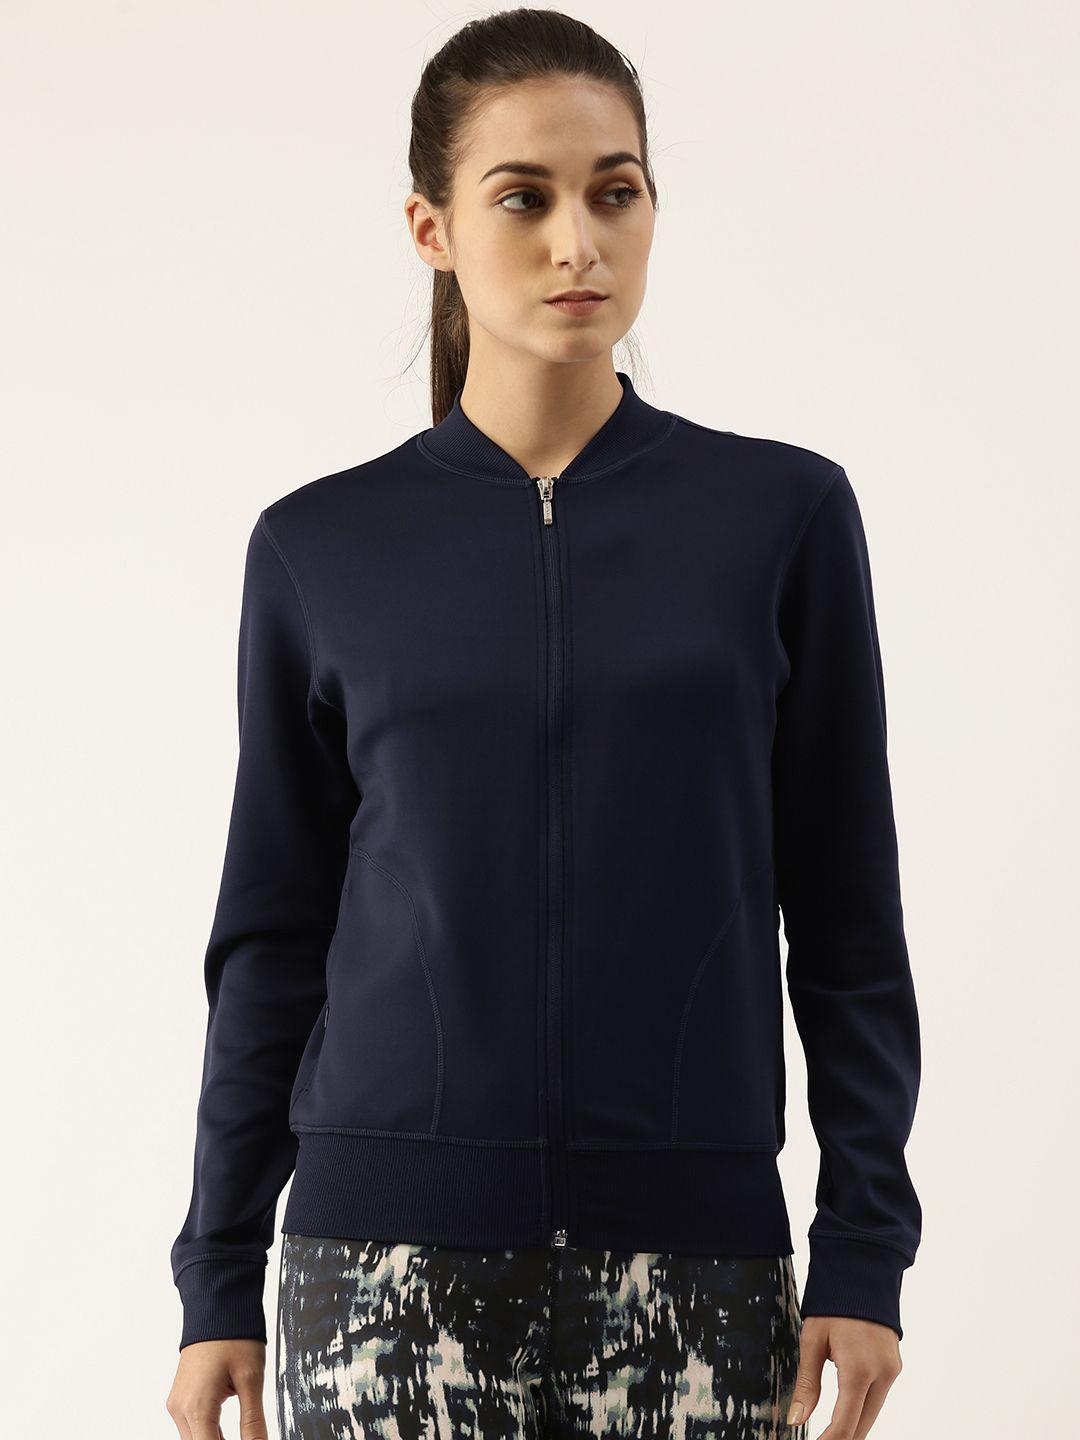 enamor women navy blue lightweight antimicrobial outdoor bomber jacket